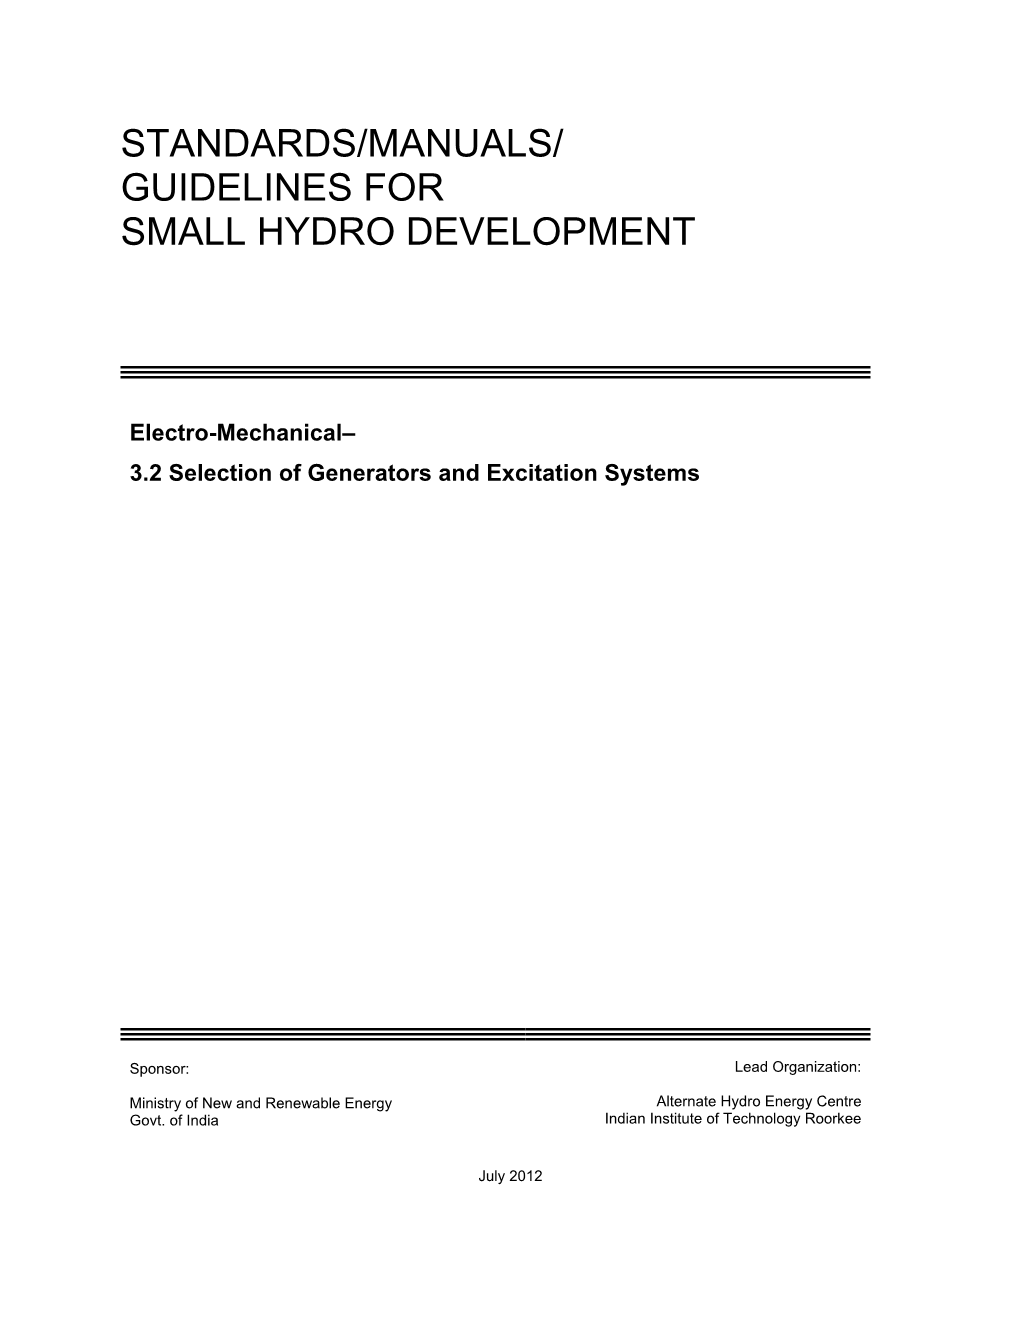 Standards/Manuals/ Guidelines for Small Hydro Development